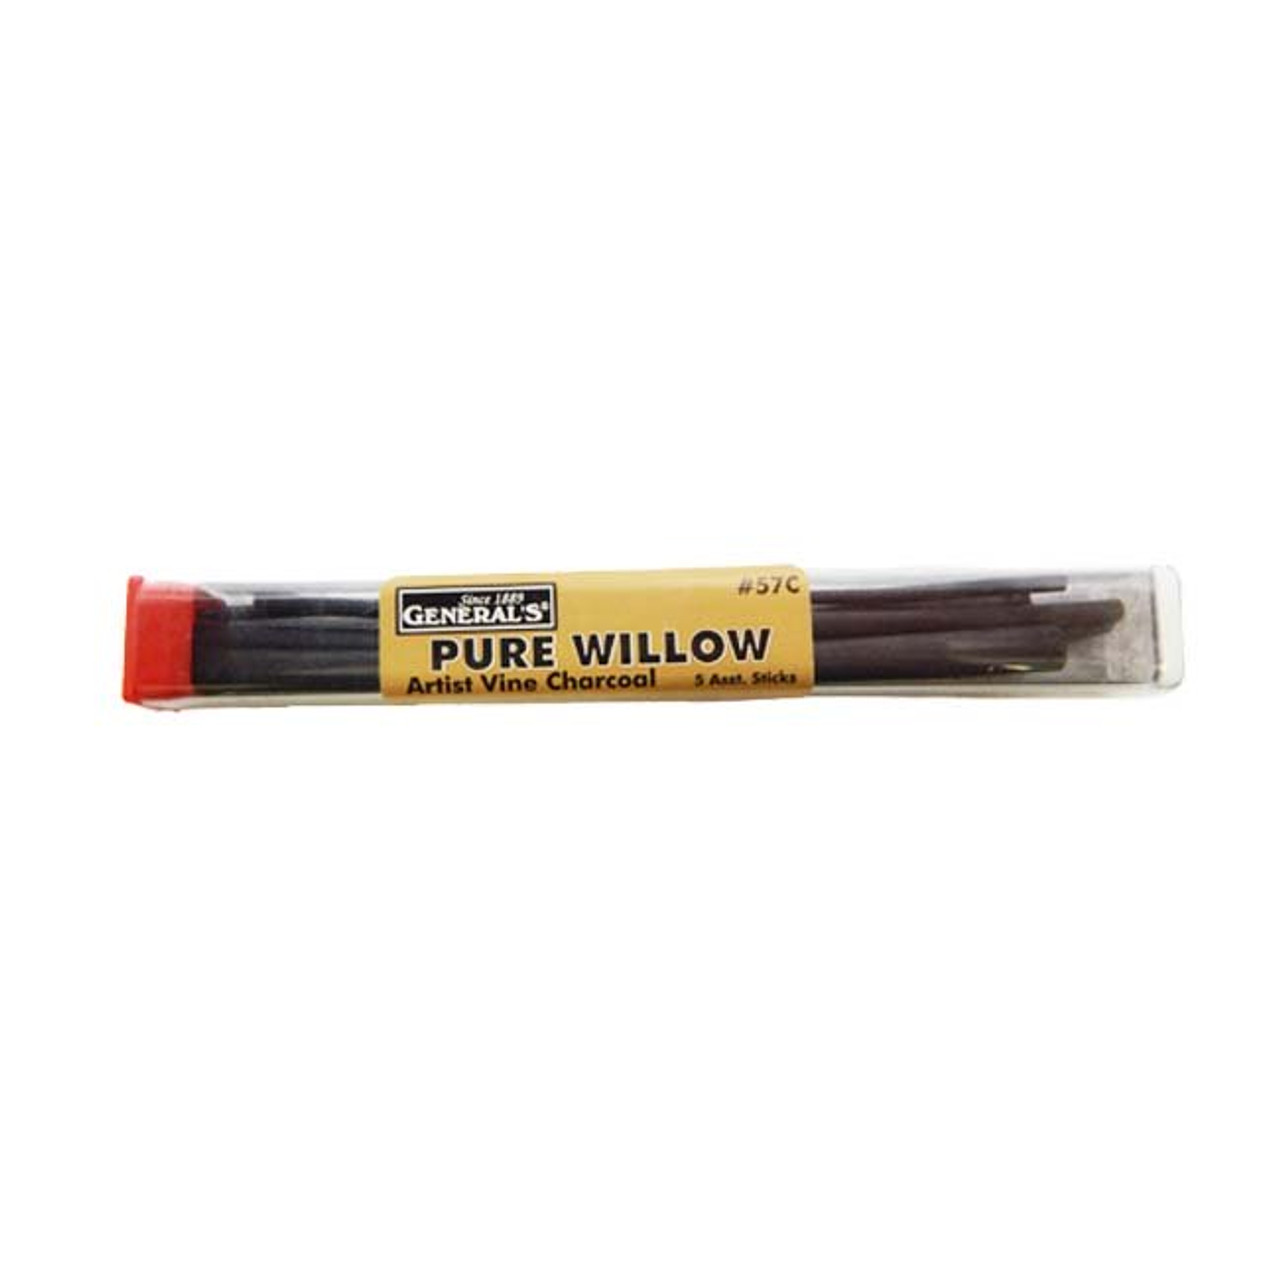 General's Willow Charcoal, 5 Pack - Artist & Craftsman Supply